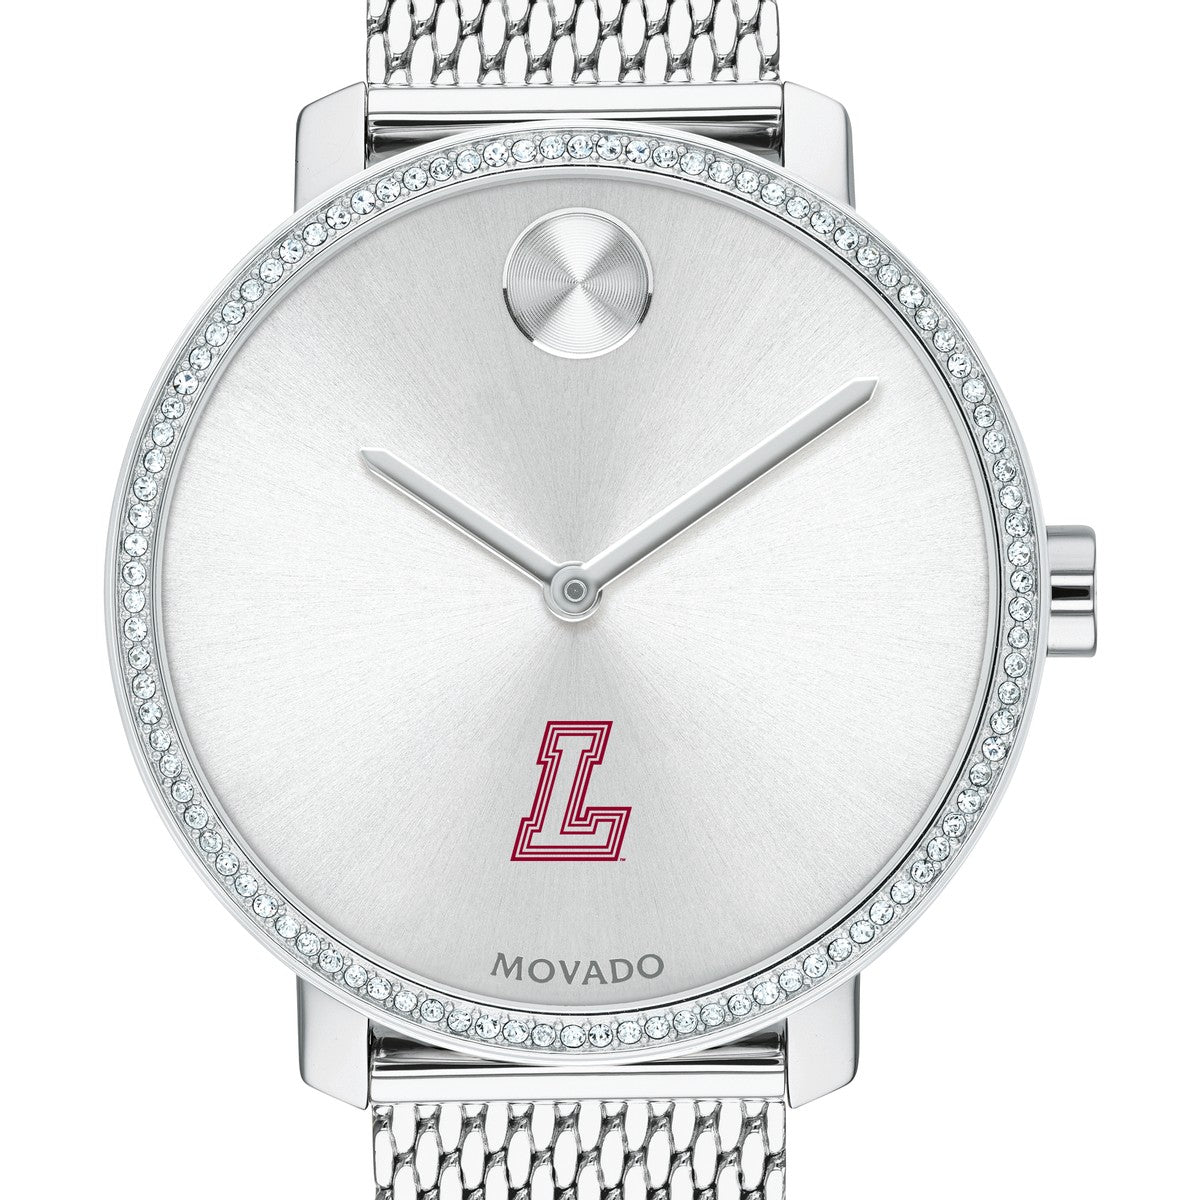 Lafayette College Women's Watches. TAG Heuer, MOVADO | M.LaHart & Co.